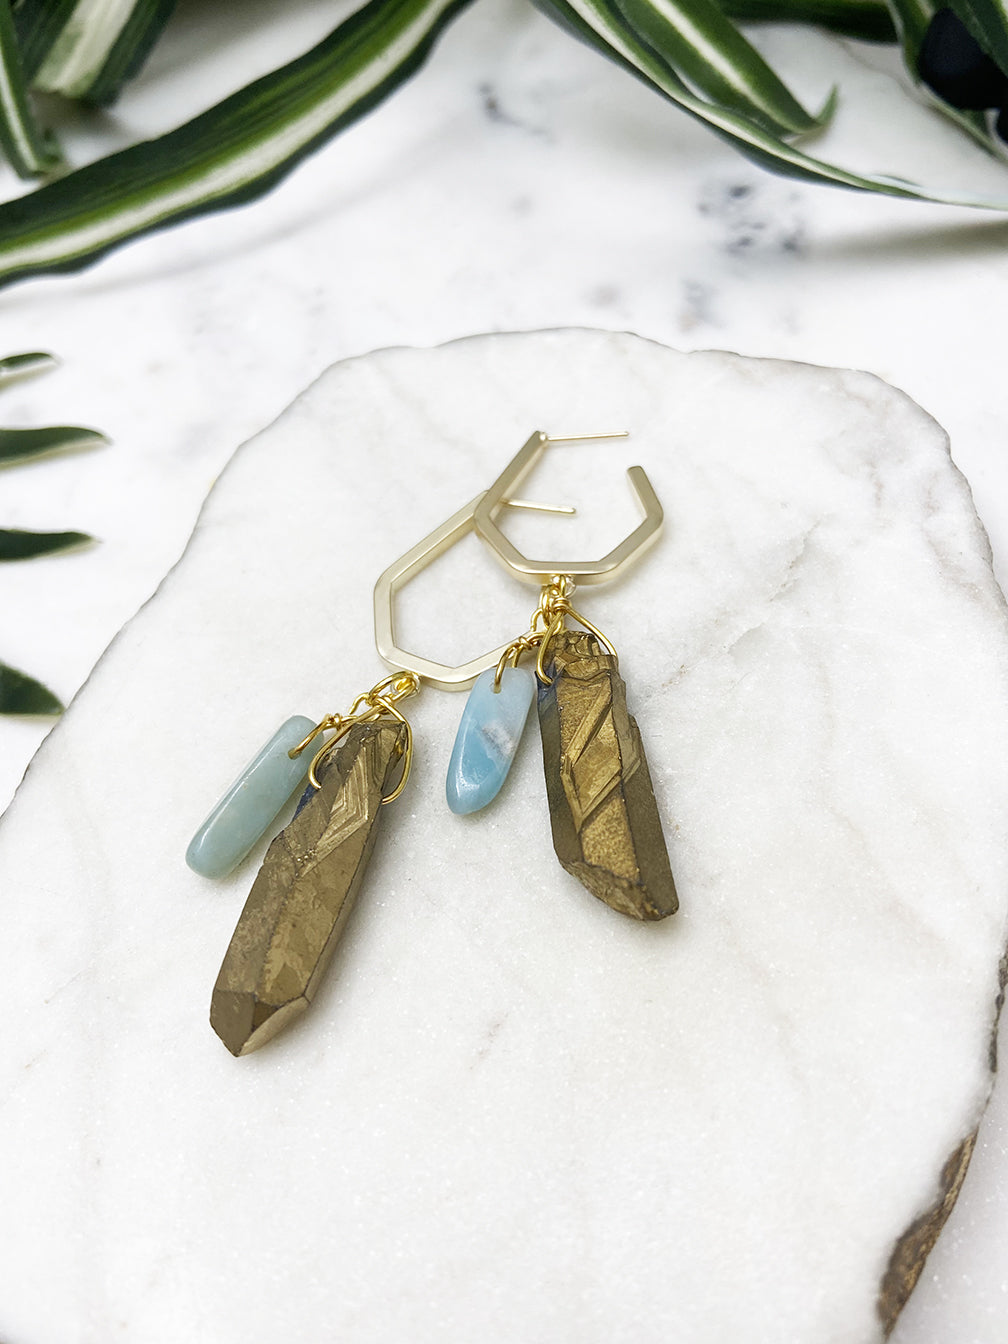 rebel earrings - gold and baby blue